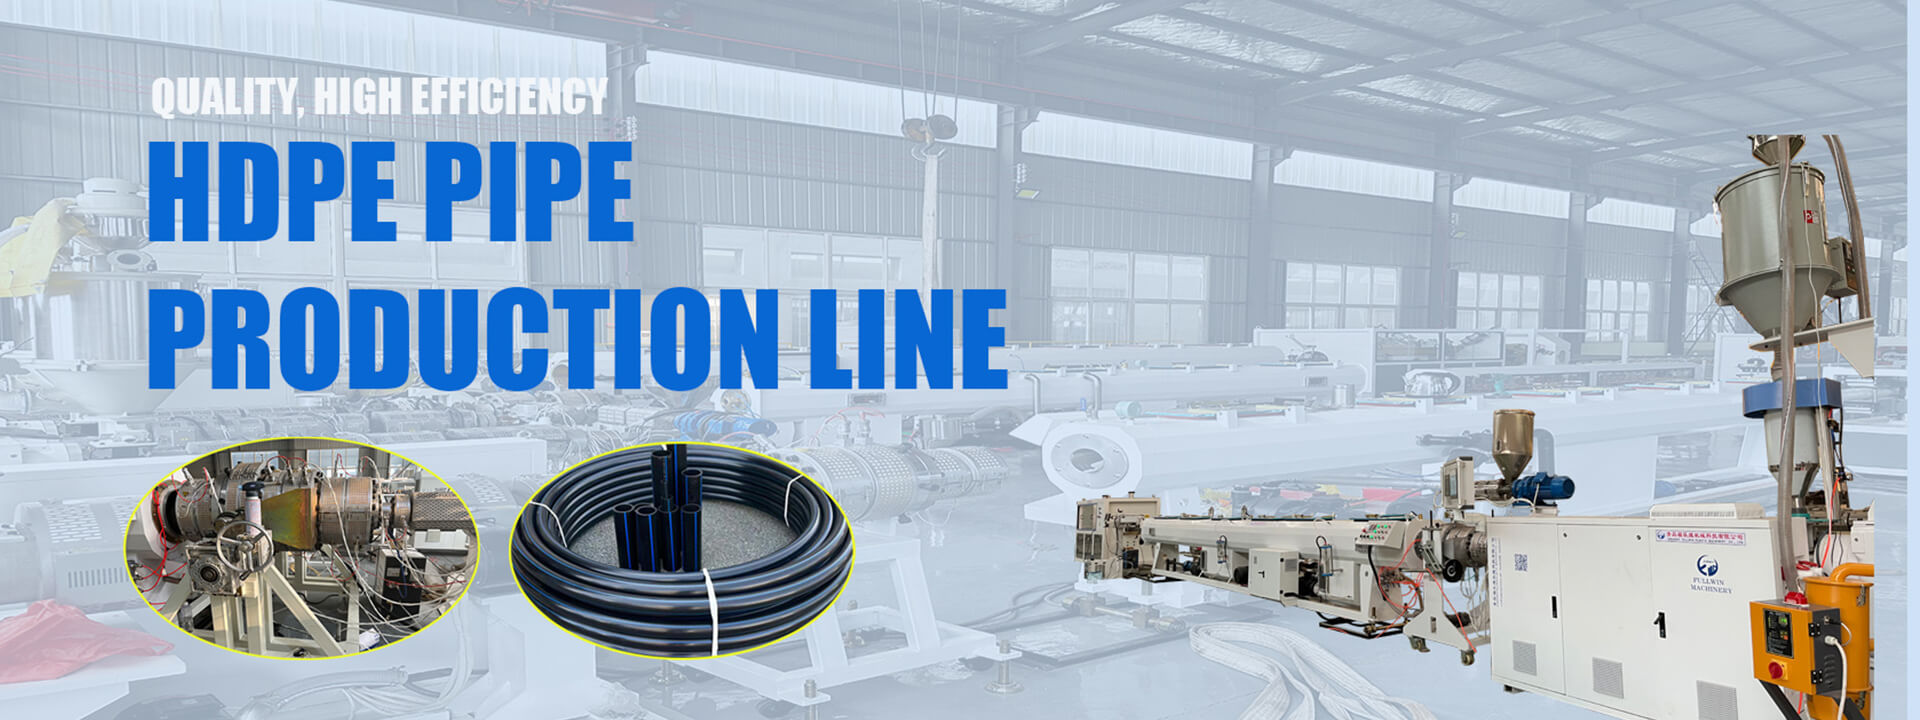 PRODUCTION LINE HDPE PIPE